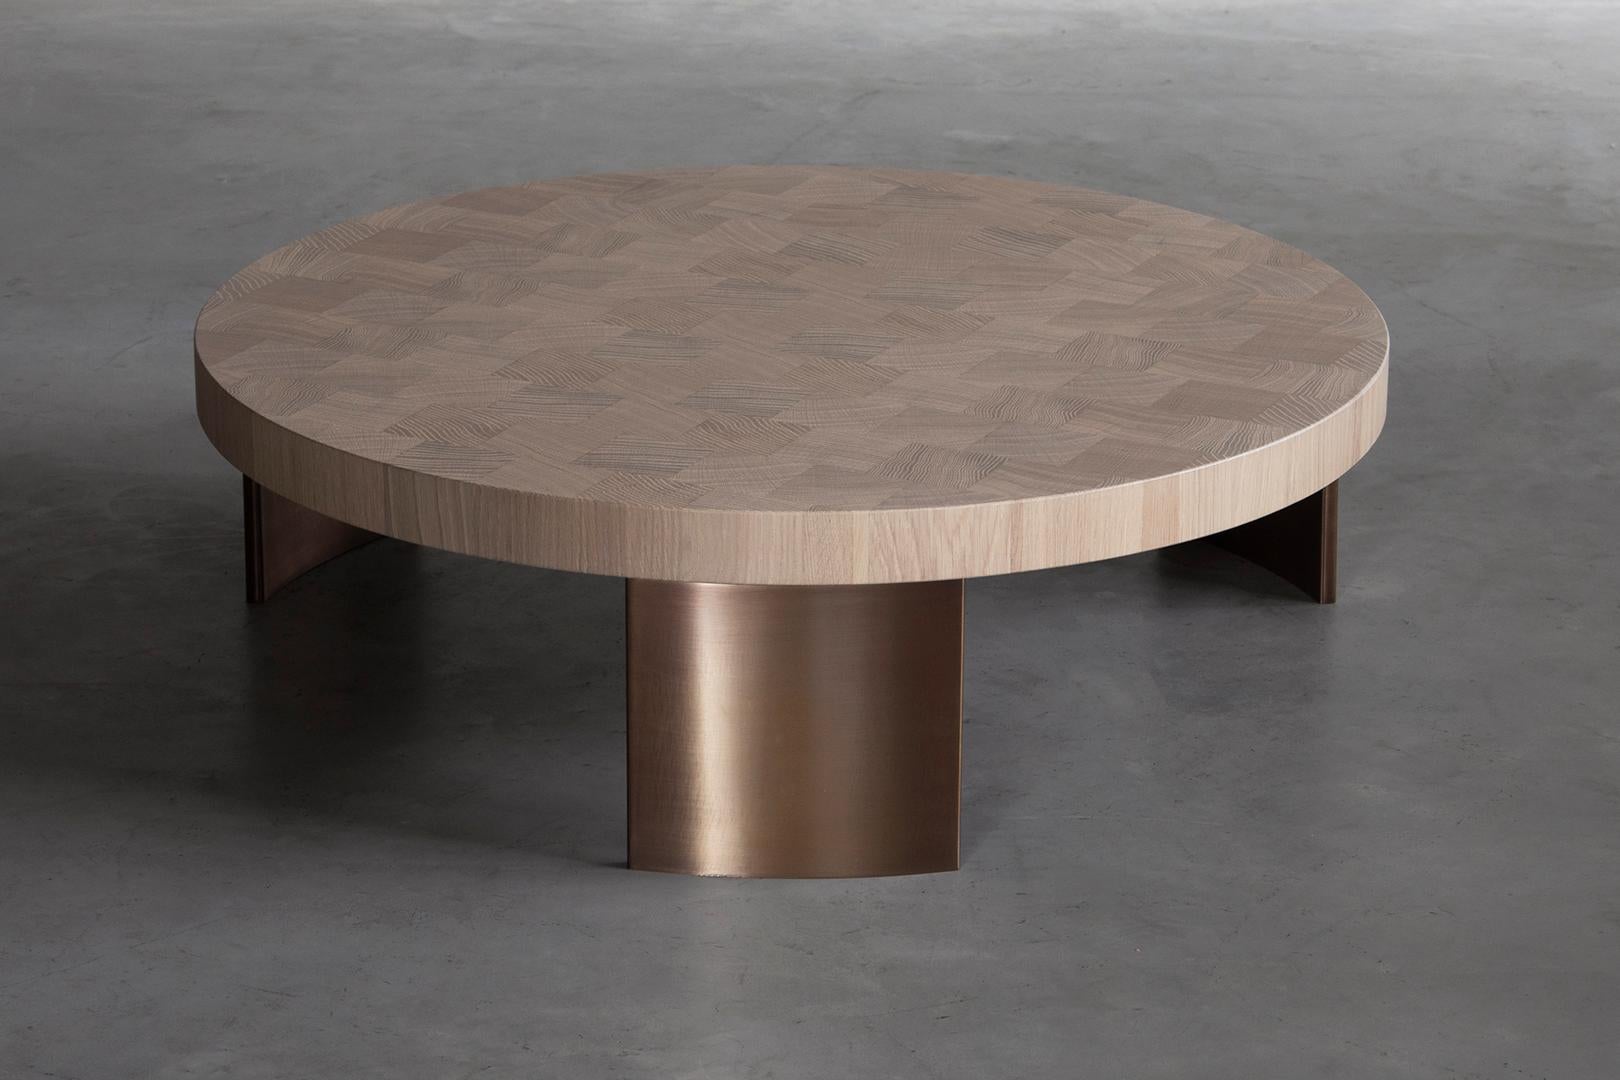 Kops coffee table medium by Van Rossum
Dimensions: D84 x W84 x H25 cm
Materials: oak, brass.
Also available in walnut. 

The wood is available in all standard Van Rossum colors, or in a matching finish to customer’s own sample.
The steel bases